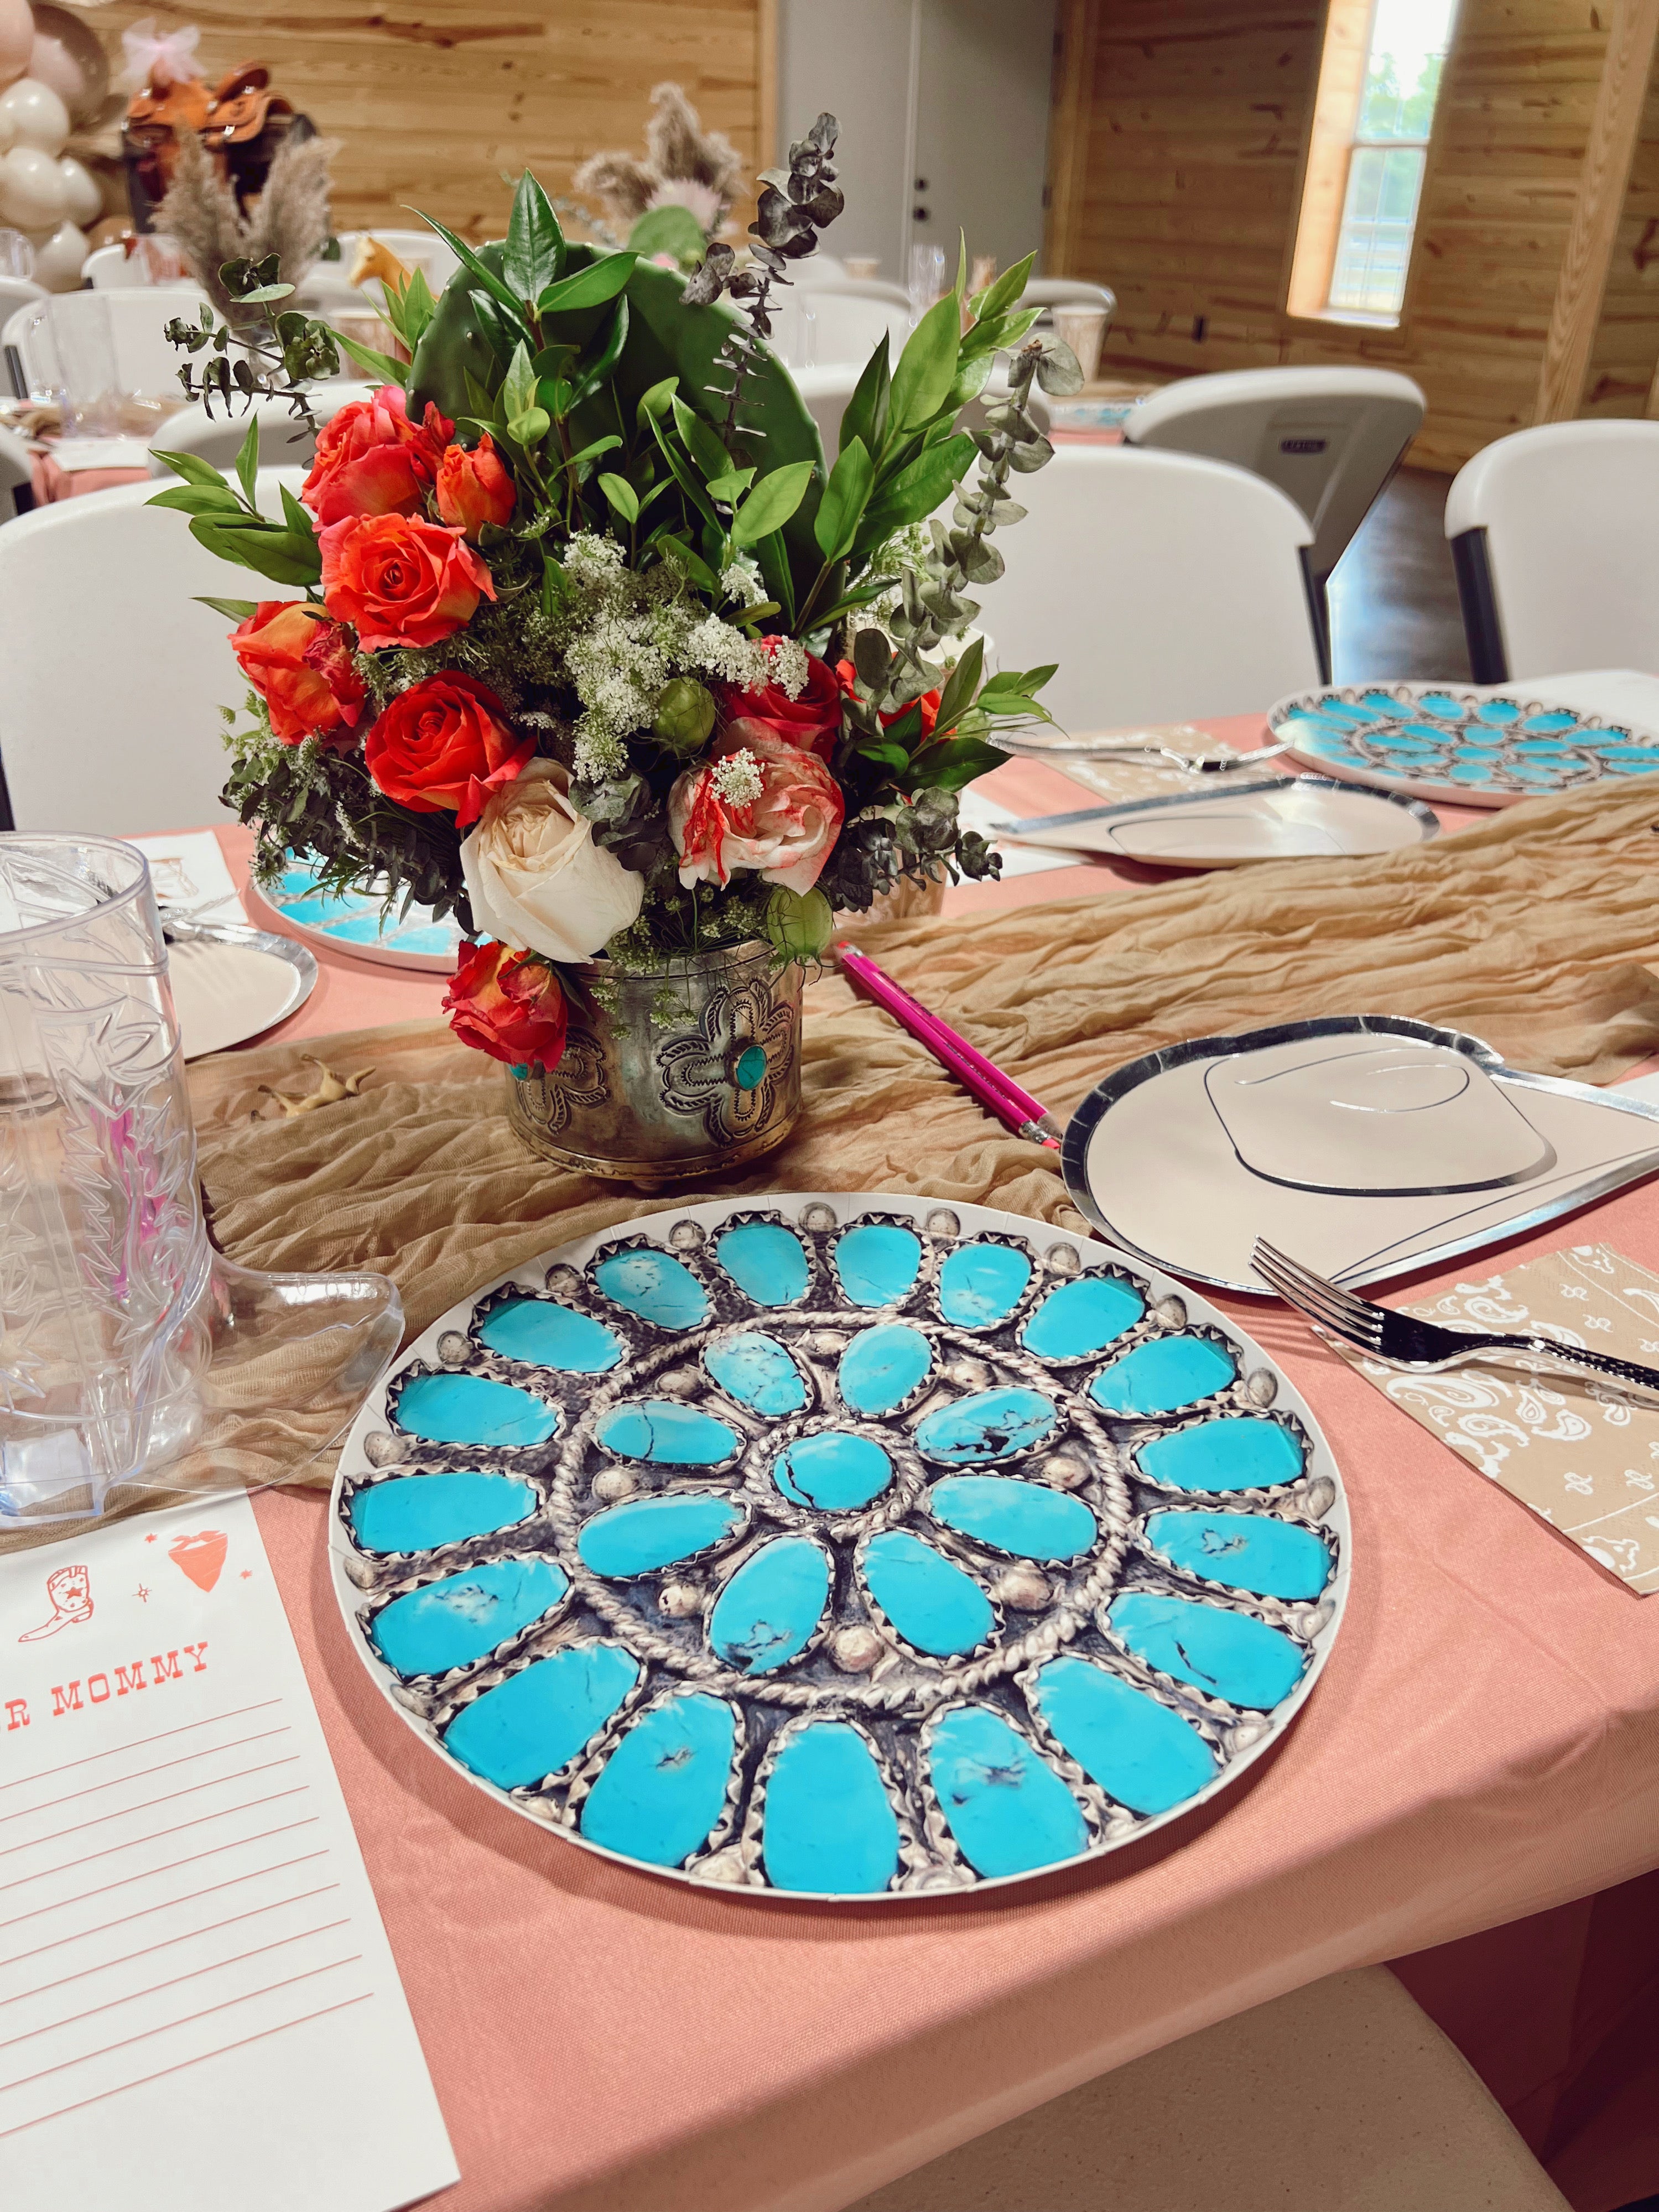 The Turquoise Cluster Dessert Plate